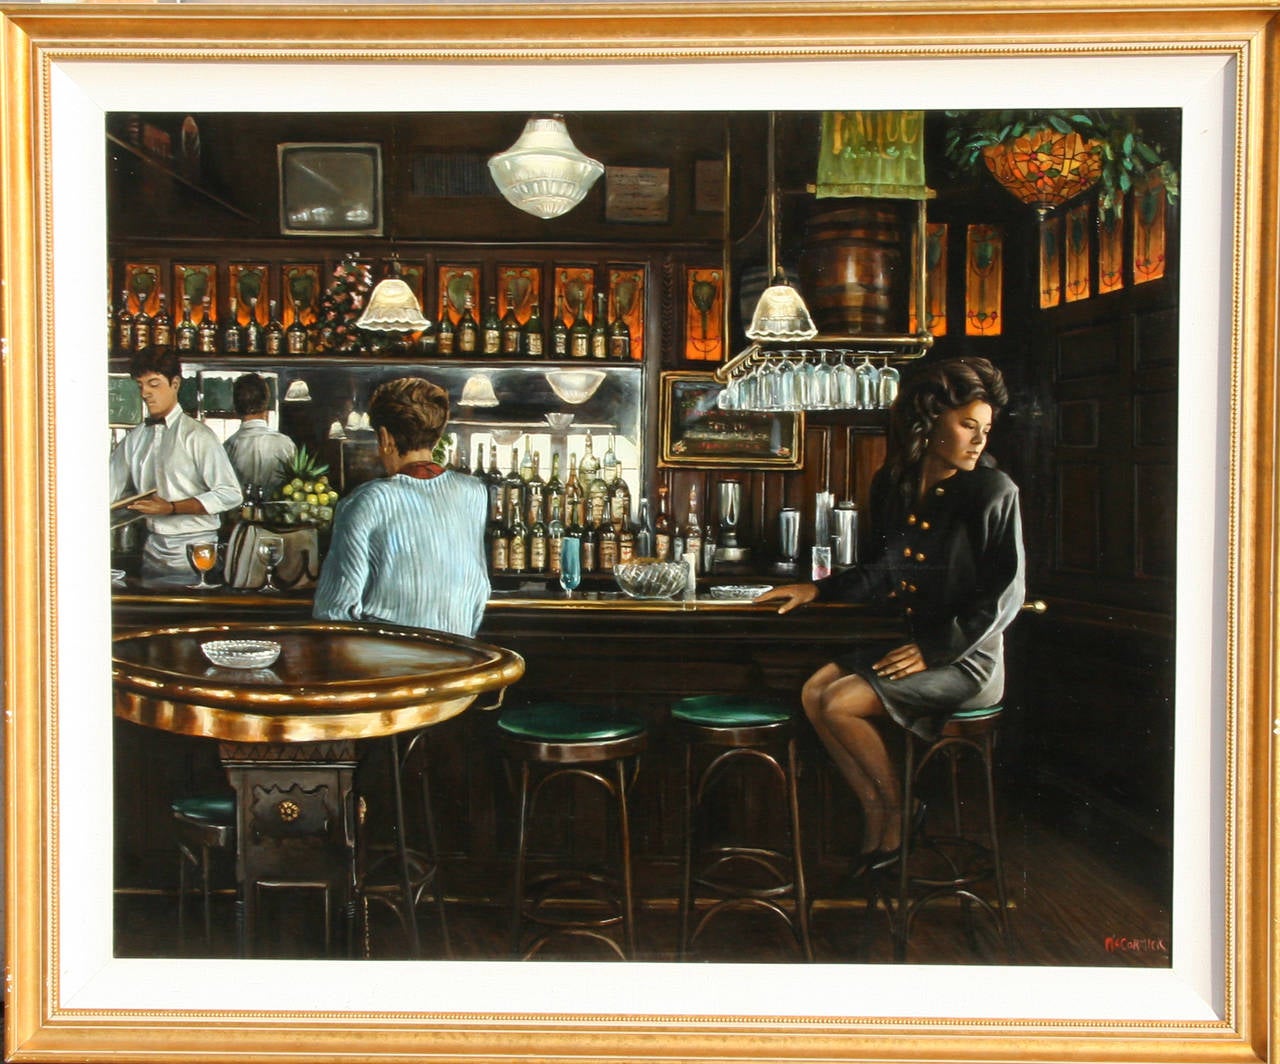 Downey's, Restaurant Interior Painting by McCormick